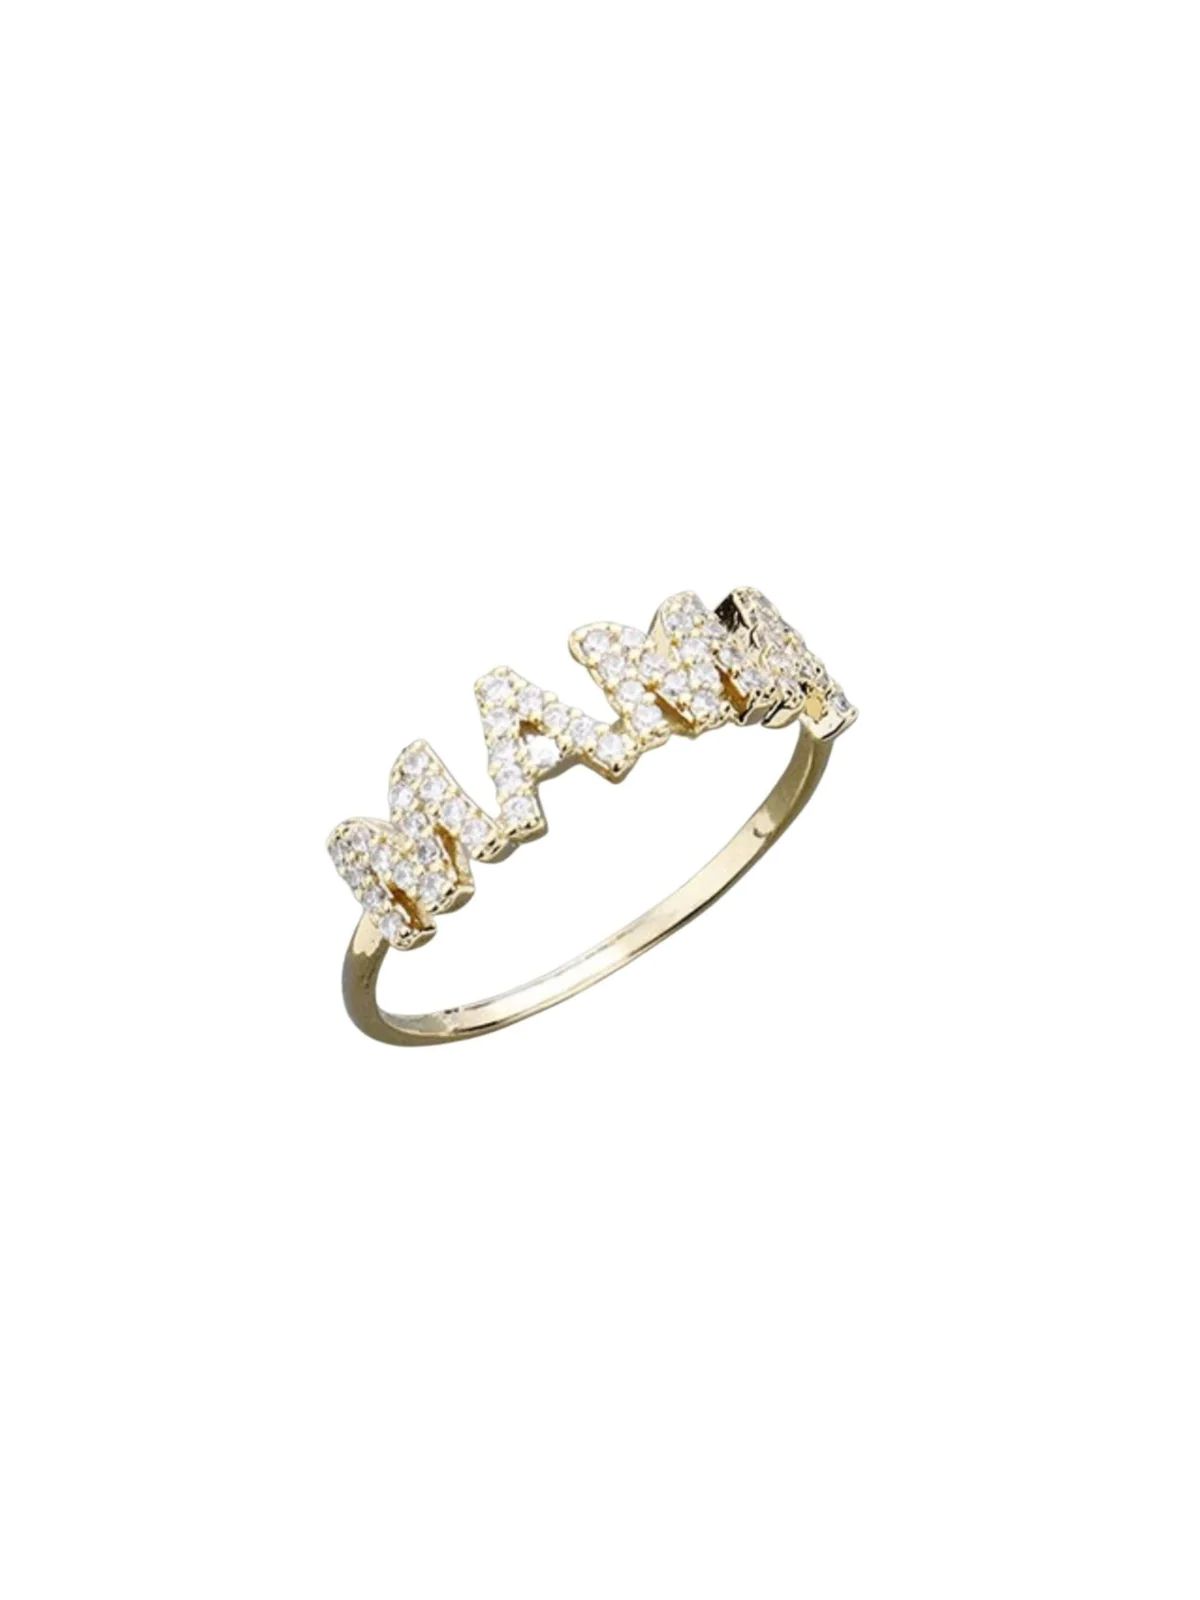 MAMA GOLD RING | Judith March